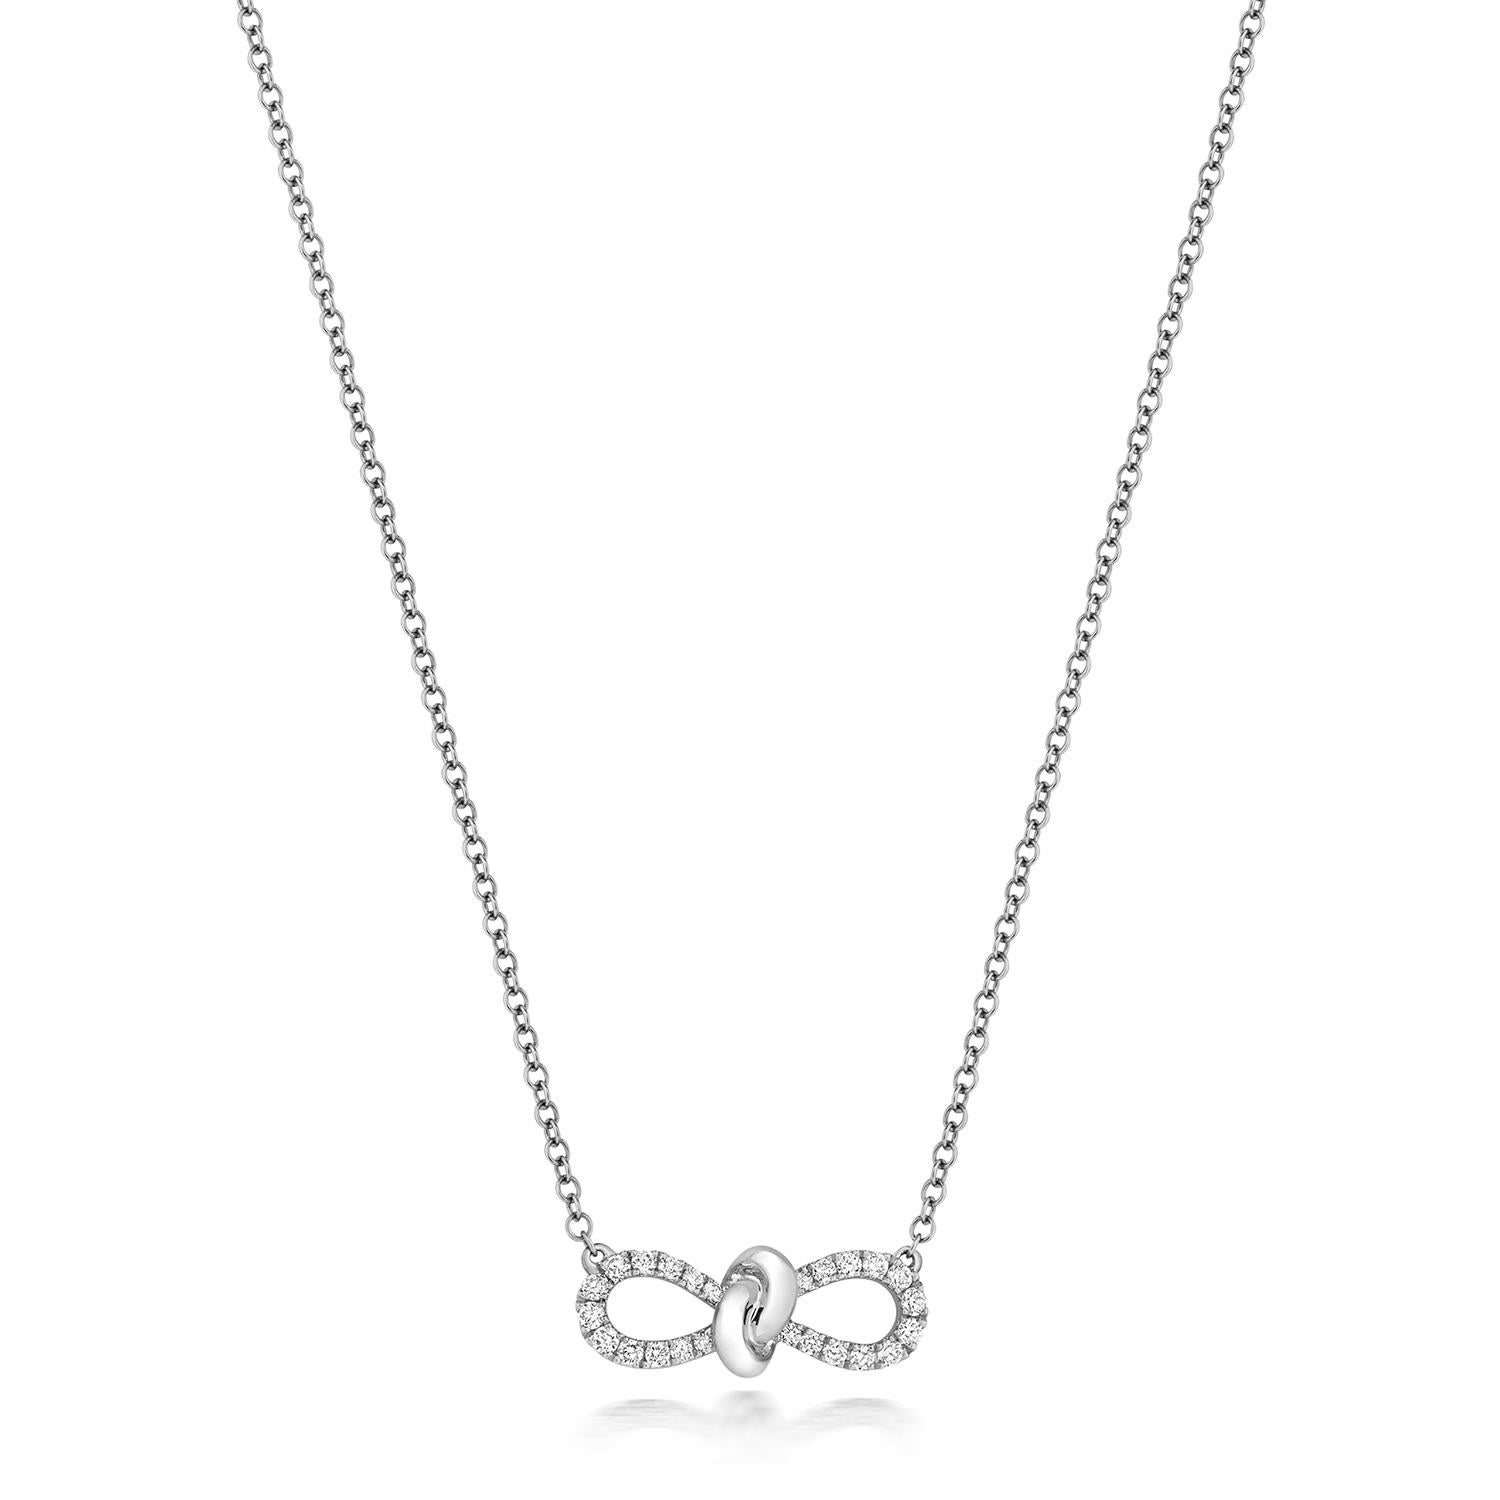 DIAMOND BOW NECKLACE 16/17INCH

18CT W/G G VS 0.19CT

Weight: 3g

Number Of Stones:24

Total Carates:0.190